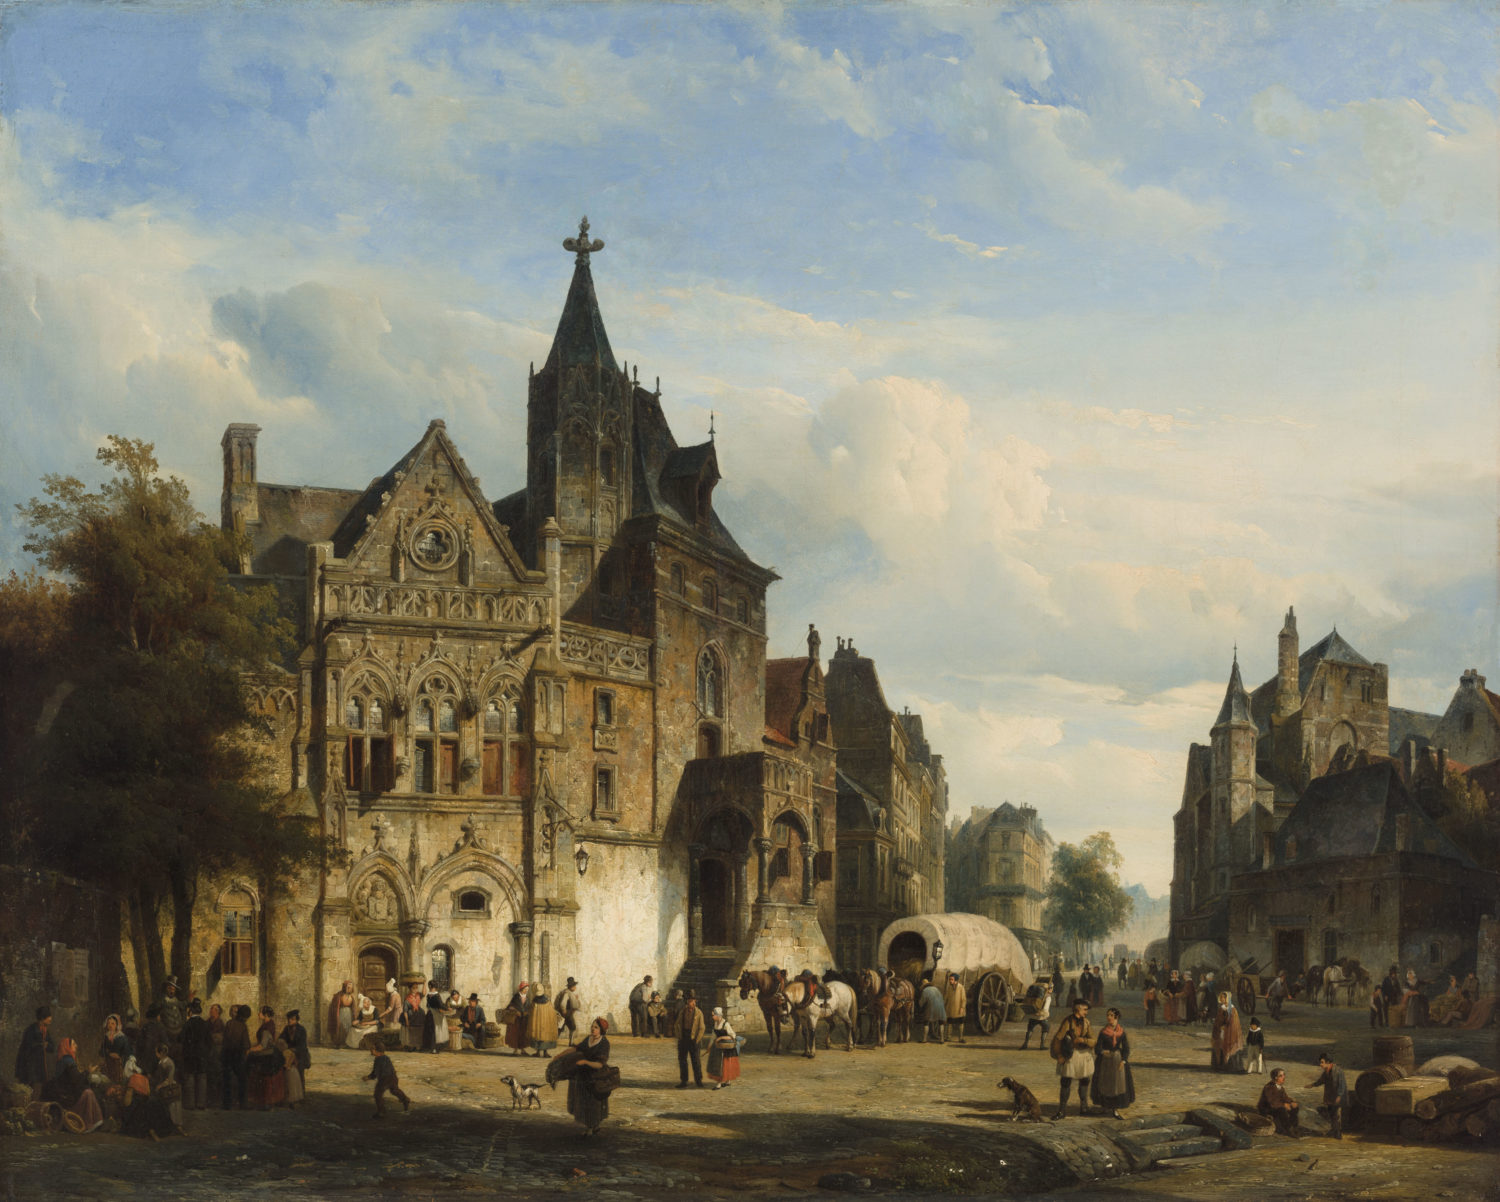 Cornelis Springer | A town view with a market and a Gothic church | Kunsthandel Bies | Bies Gallery